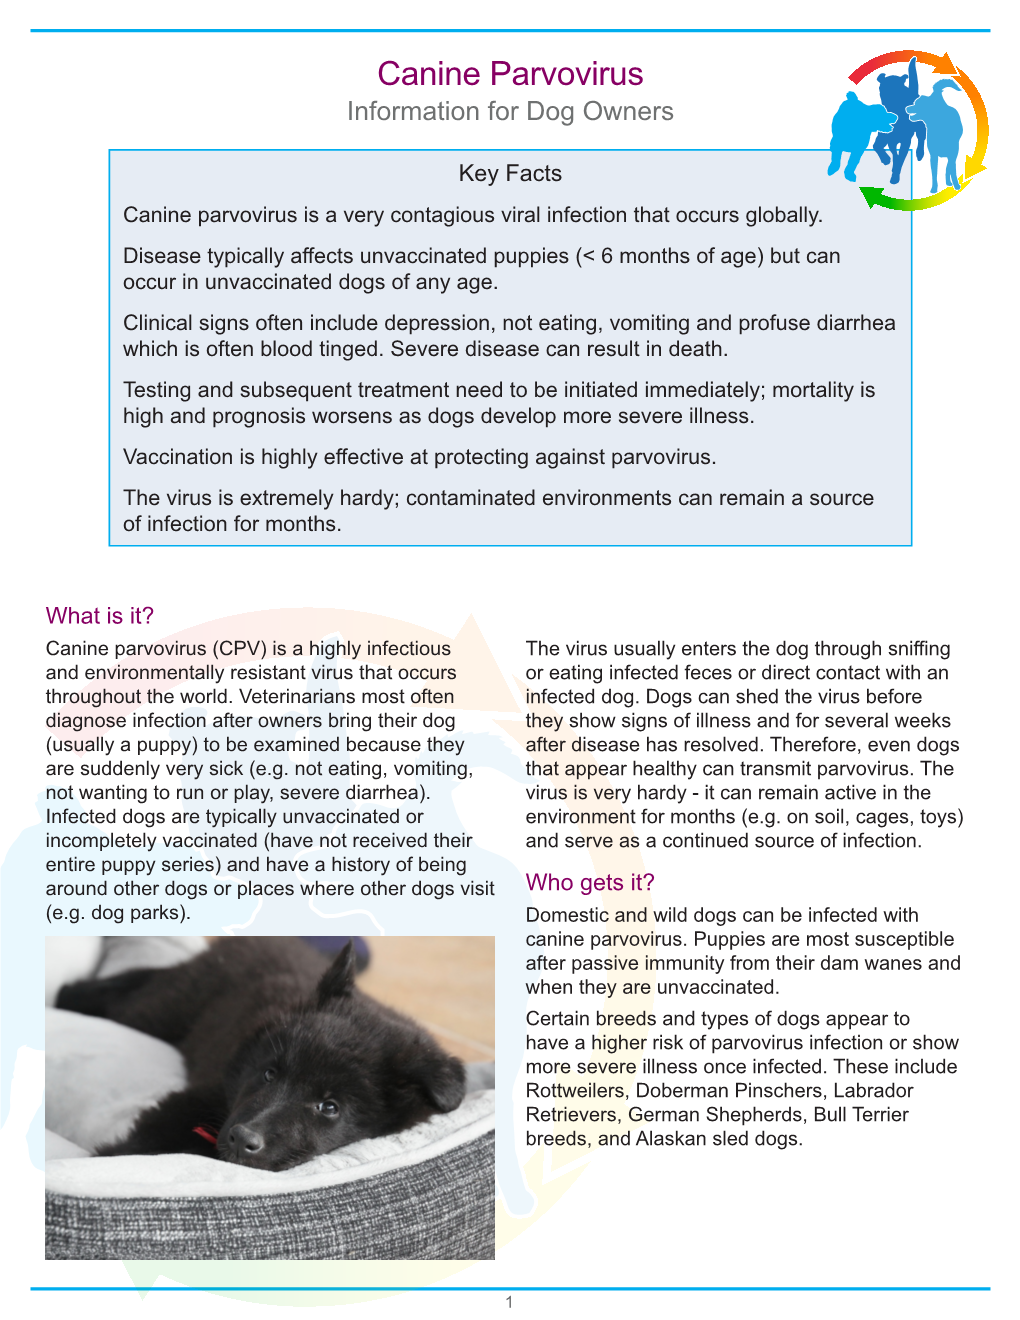 Canine Parvovirus Information for Dog Owners